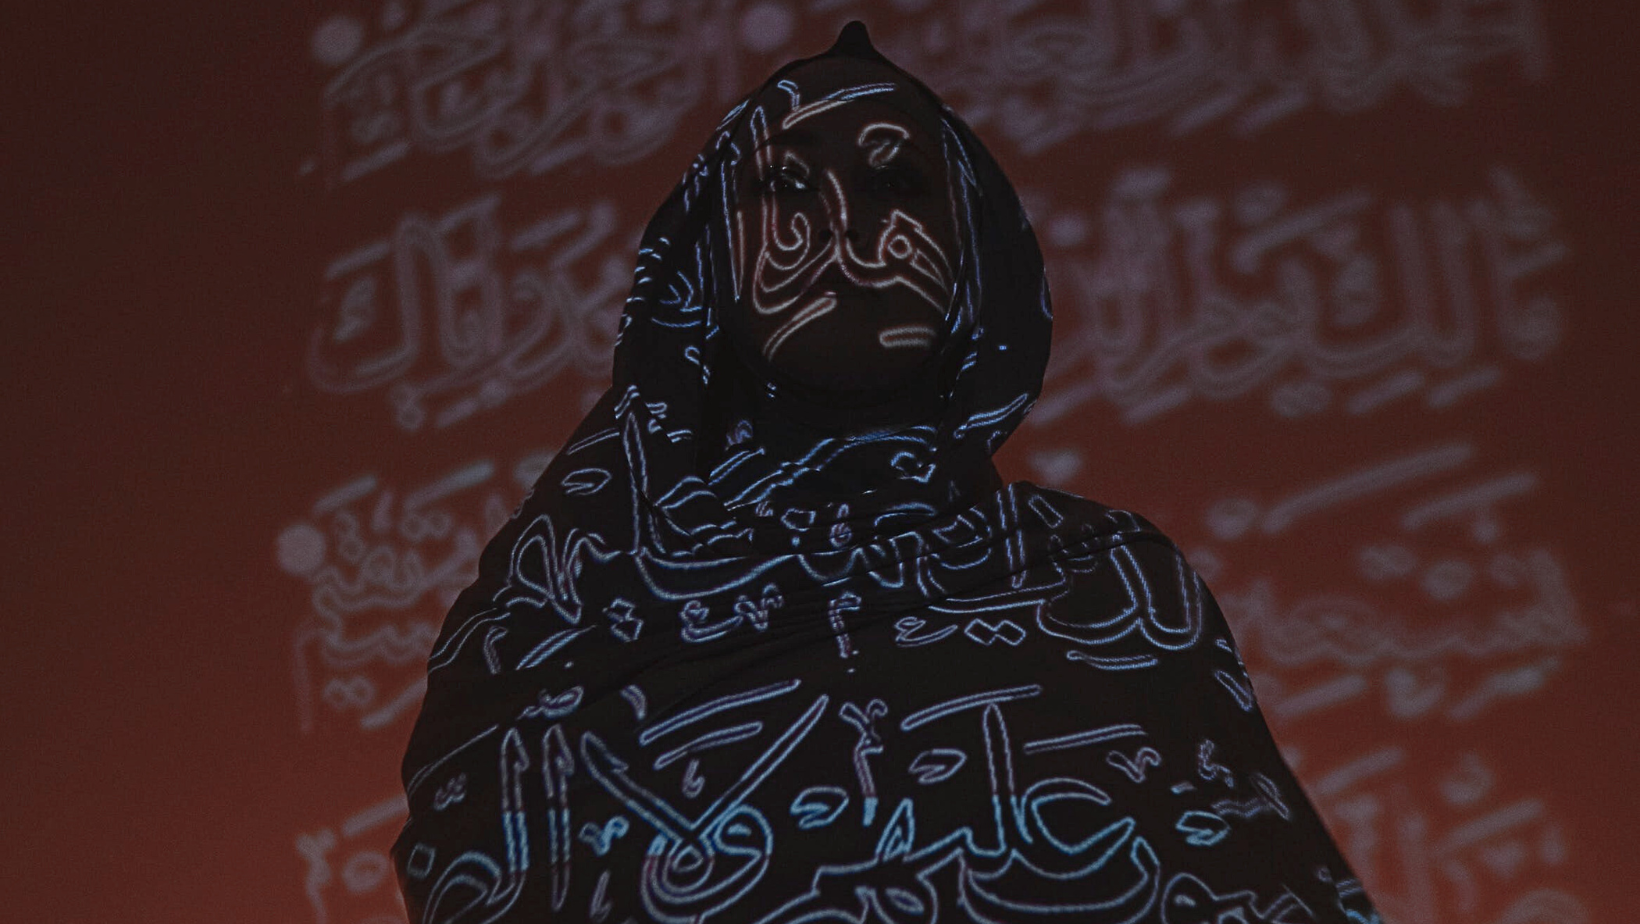 Blog title image - Muslim with Quran shining on face